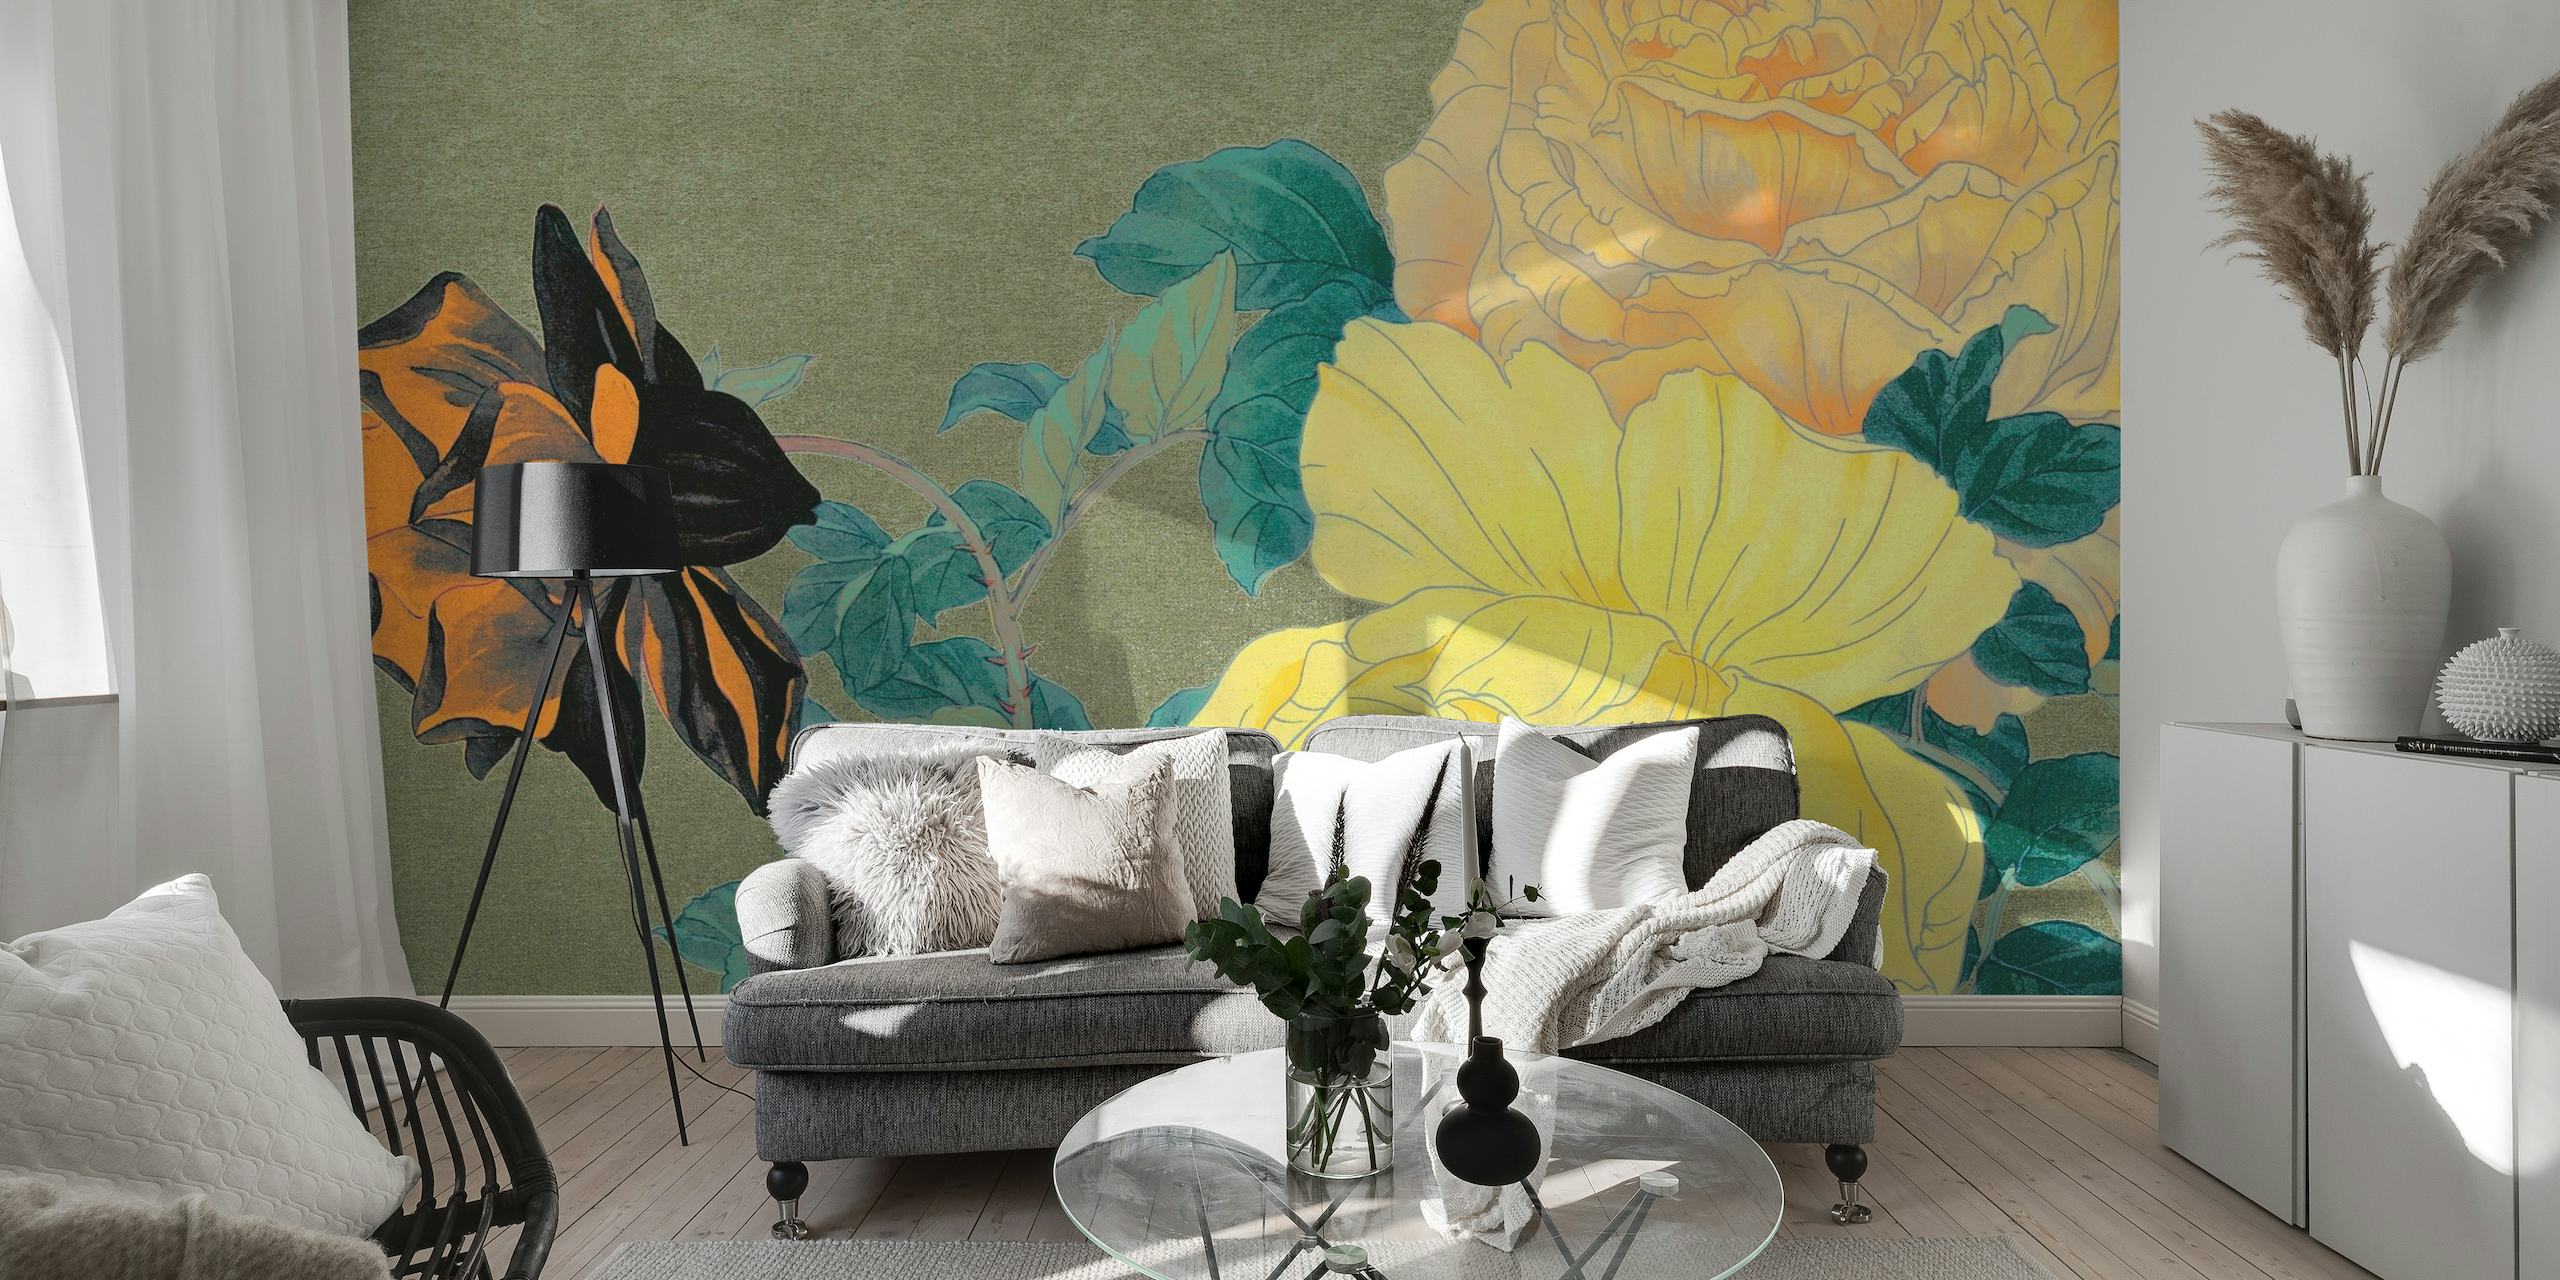 Antique Nordic Peonies wall mural with vintage hues